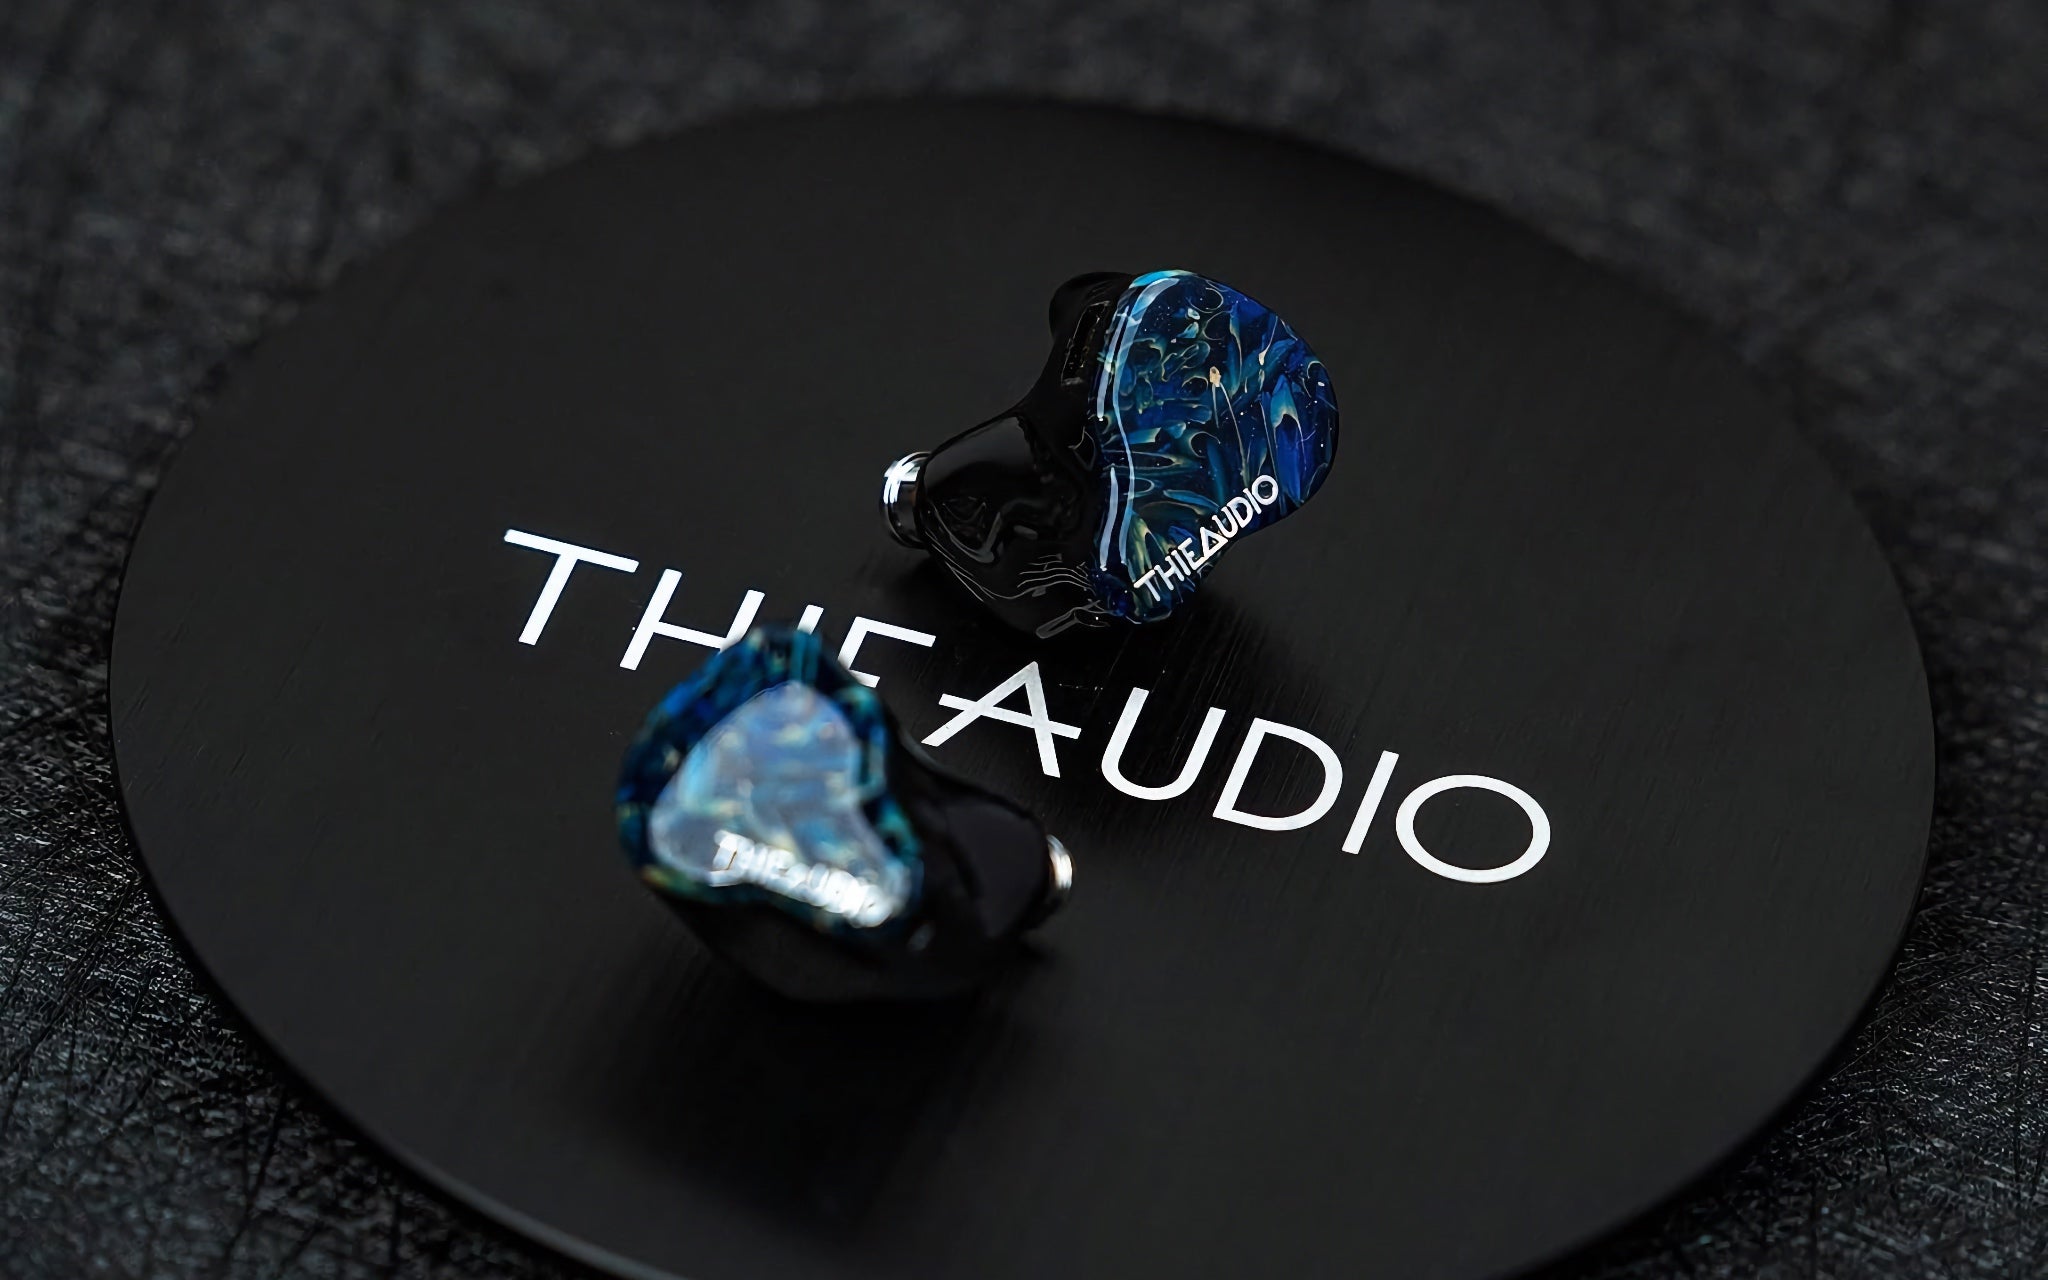 Thieaudio Hype 2 blue IEMs on black cylindrical plate with logo